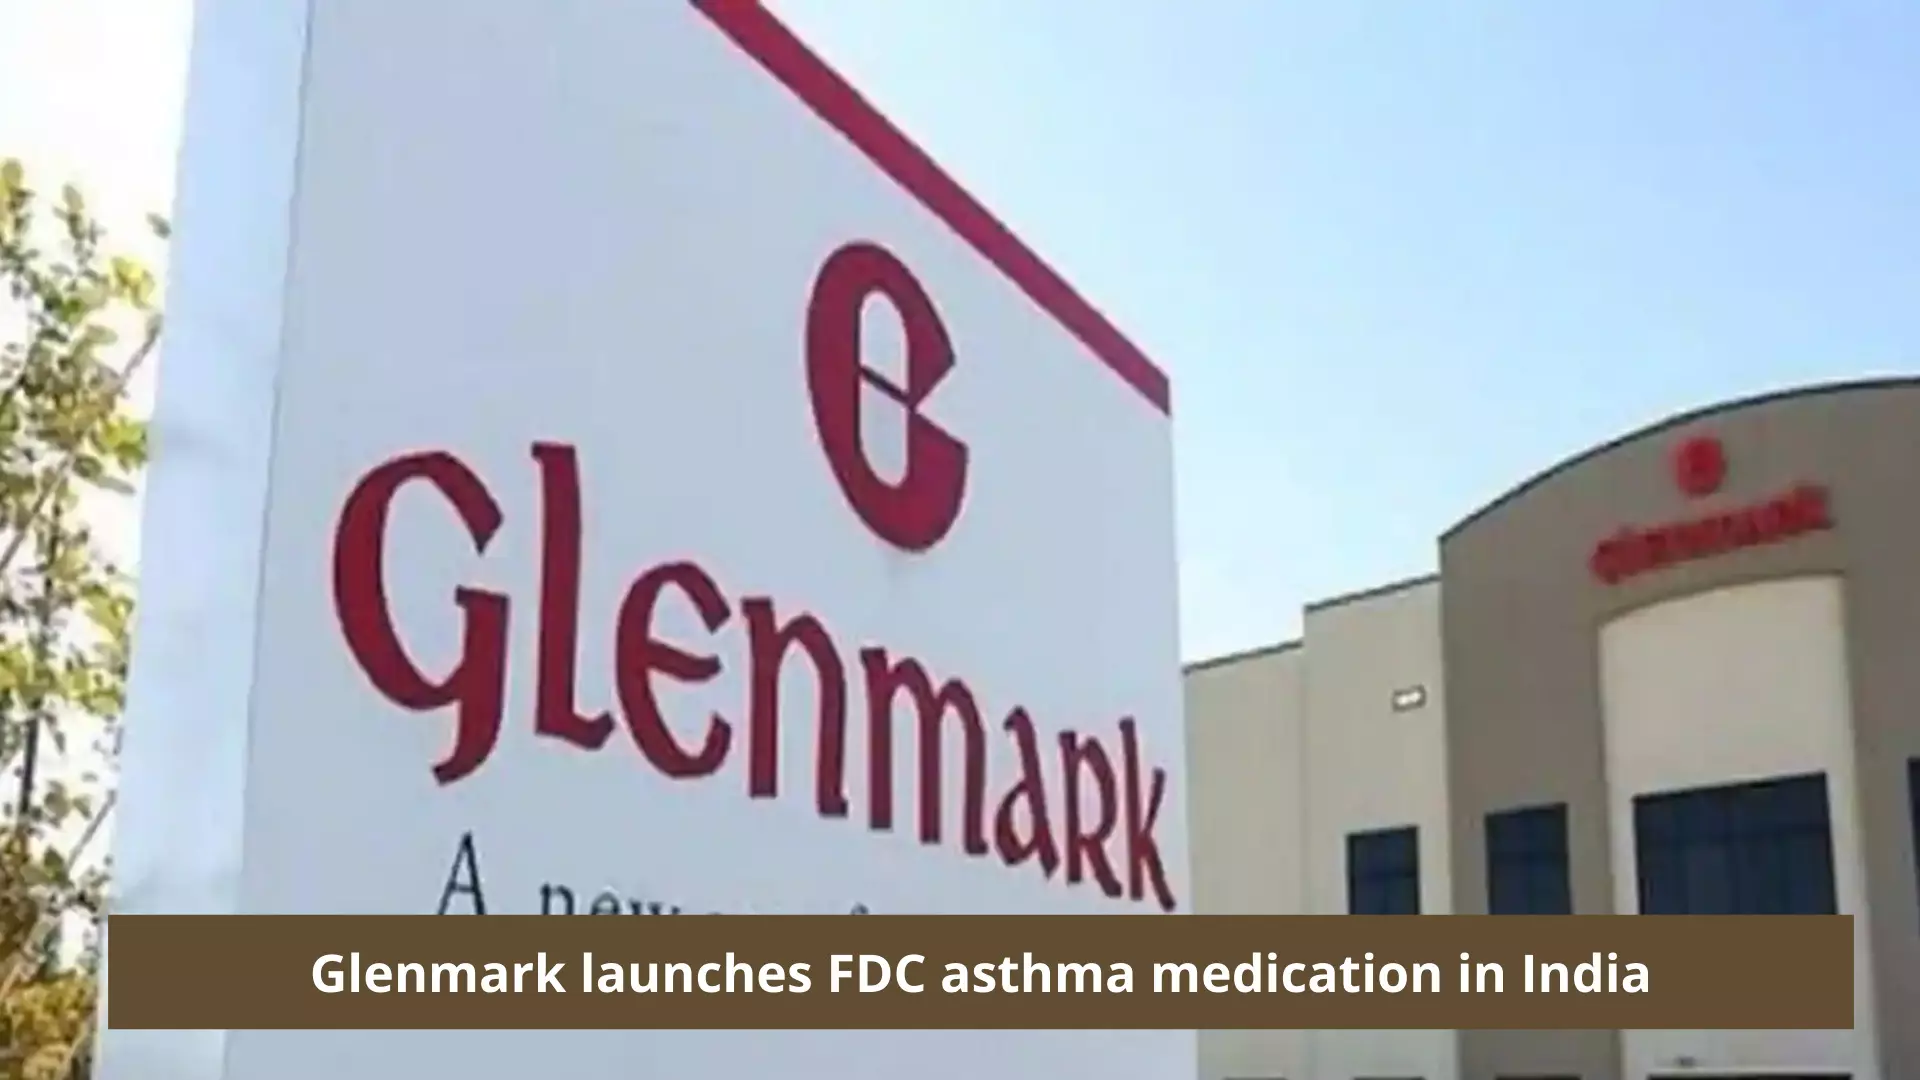 Glenmark launches FDC asthma medication in India